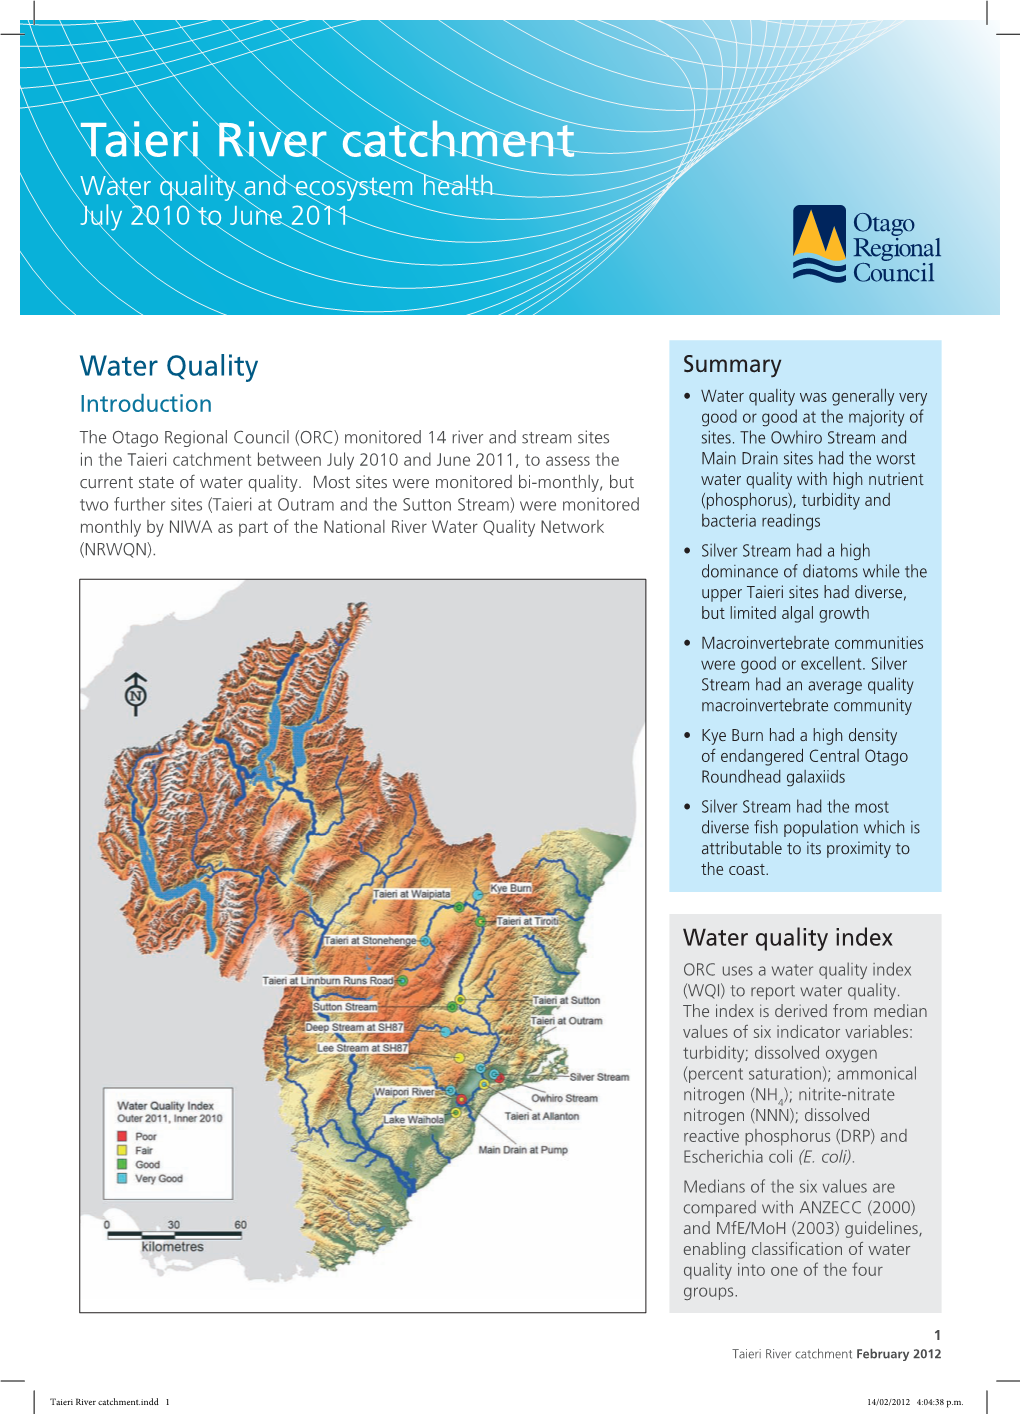 Taieri River Catchment Water Quality and Ecosystem Health July 2010 to June 2011